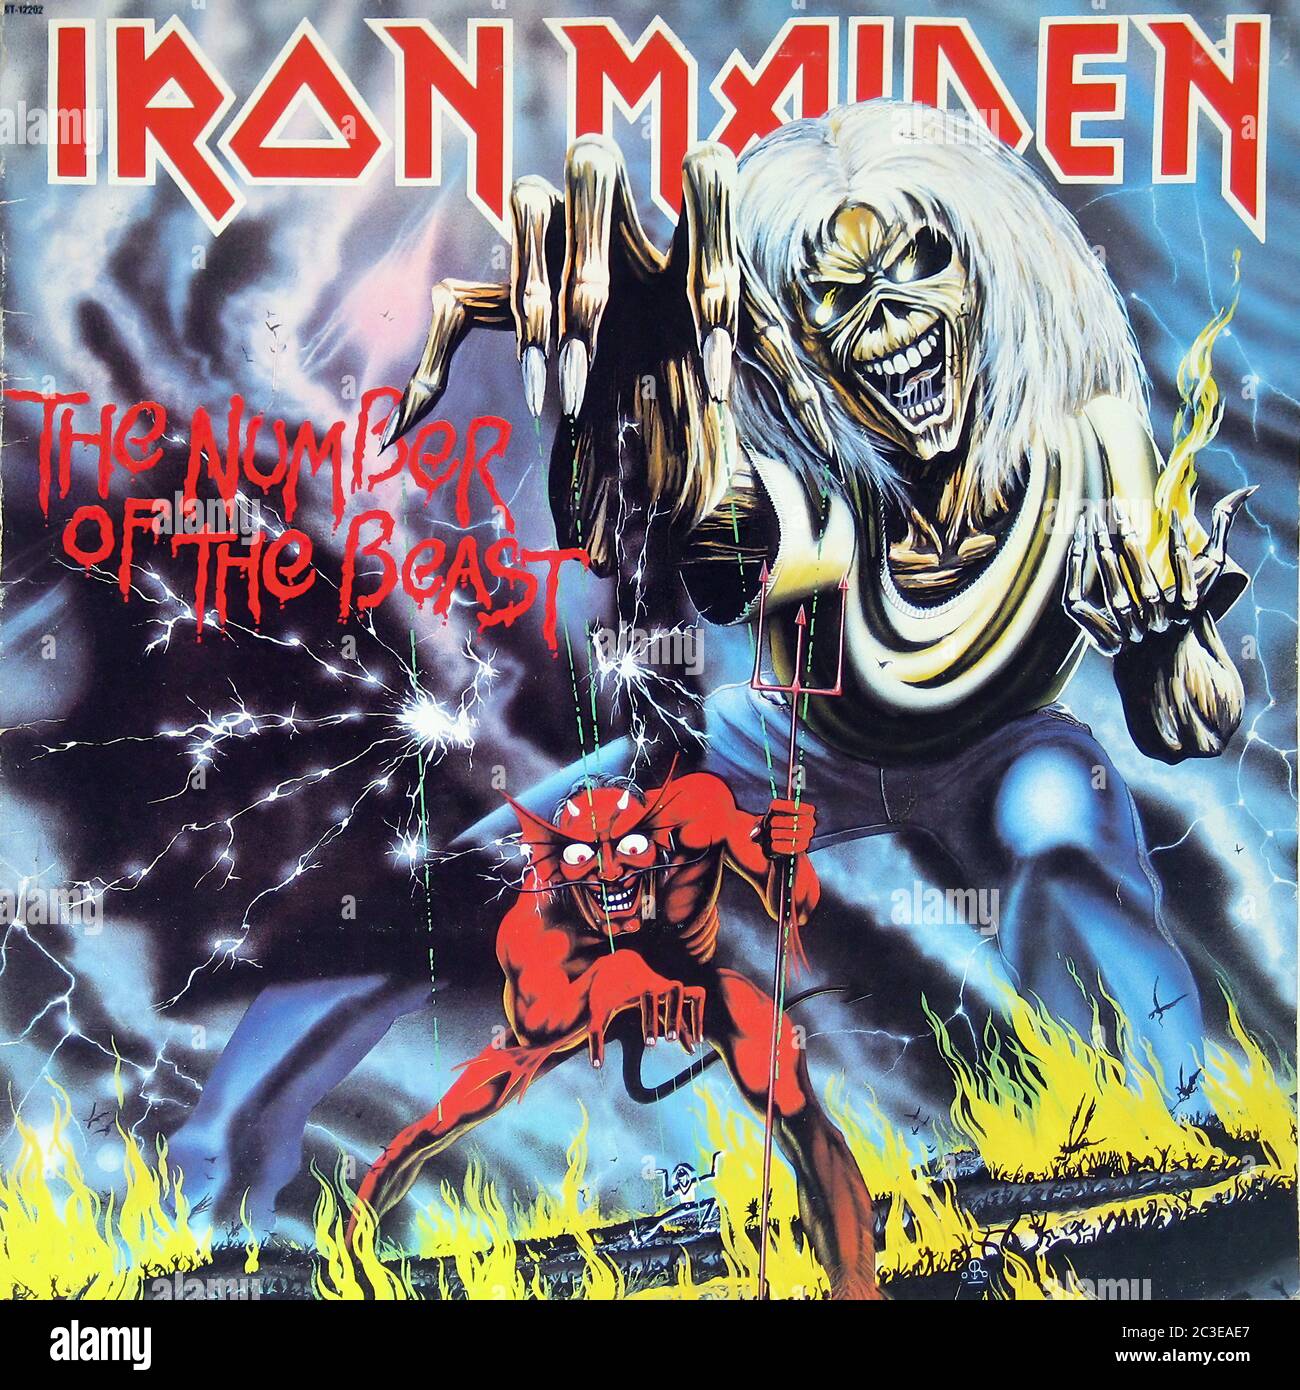 IRON MAIDEN The Number of the Beast - copertina LP in vinile vintage da 12'' Foto Stock